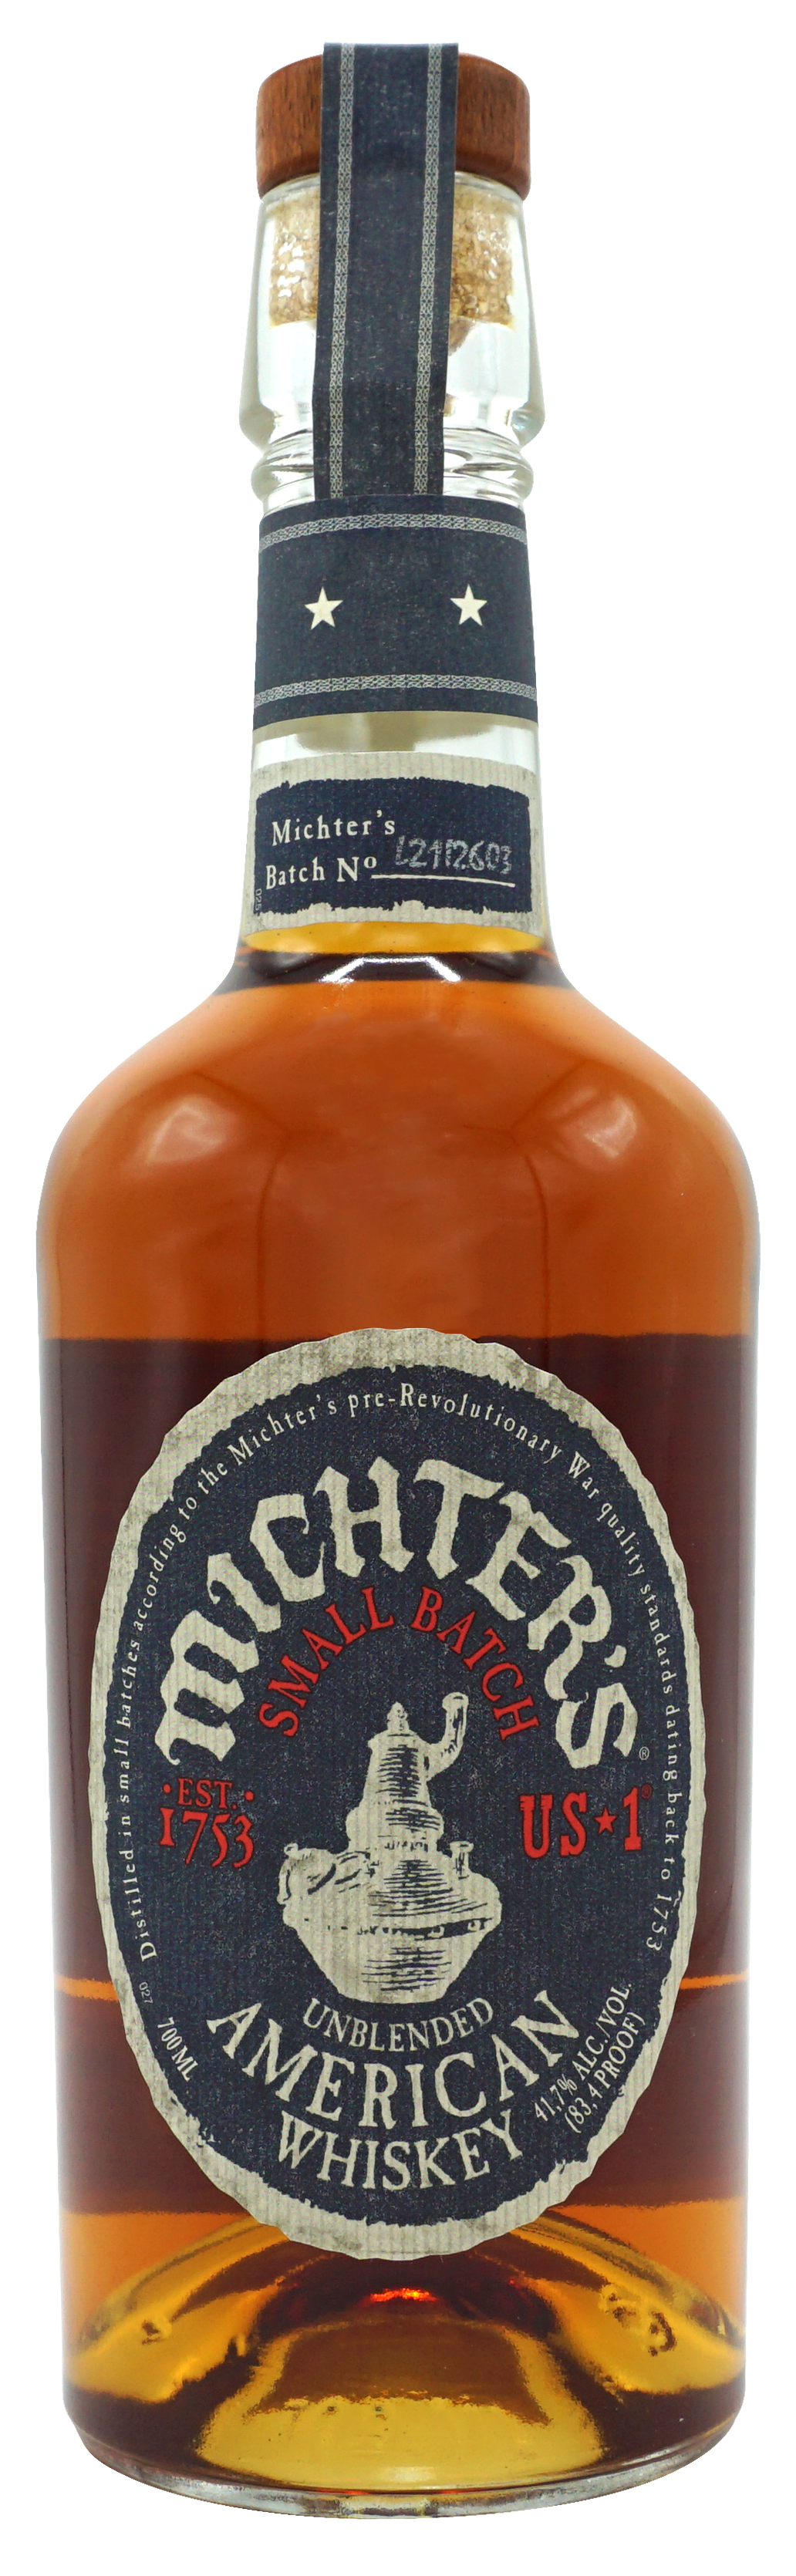 michters-american-whiskey-417